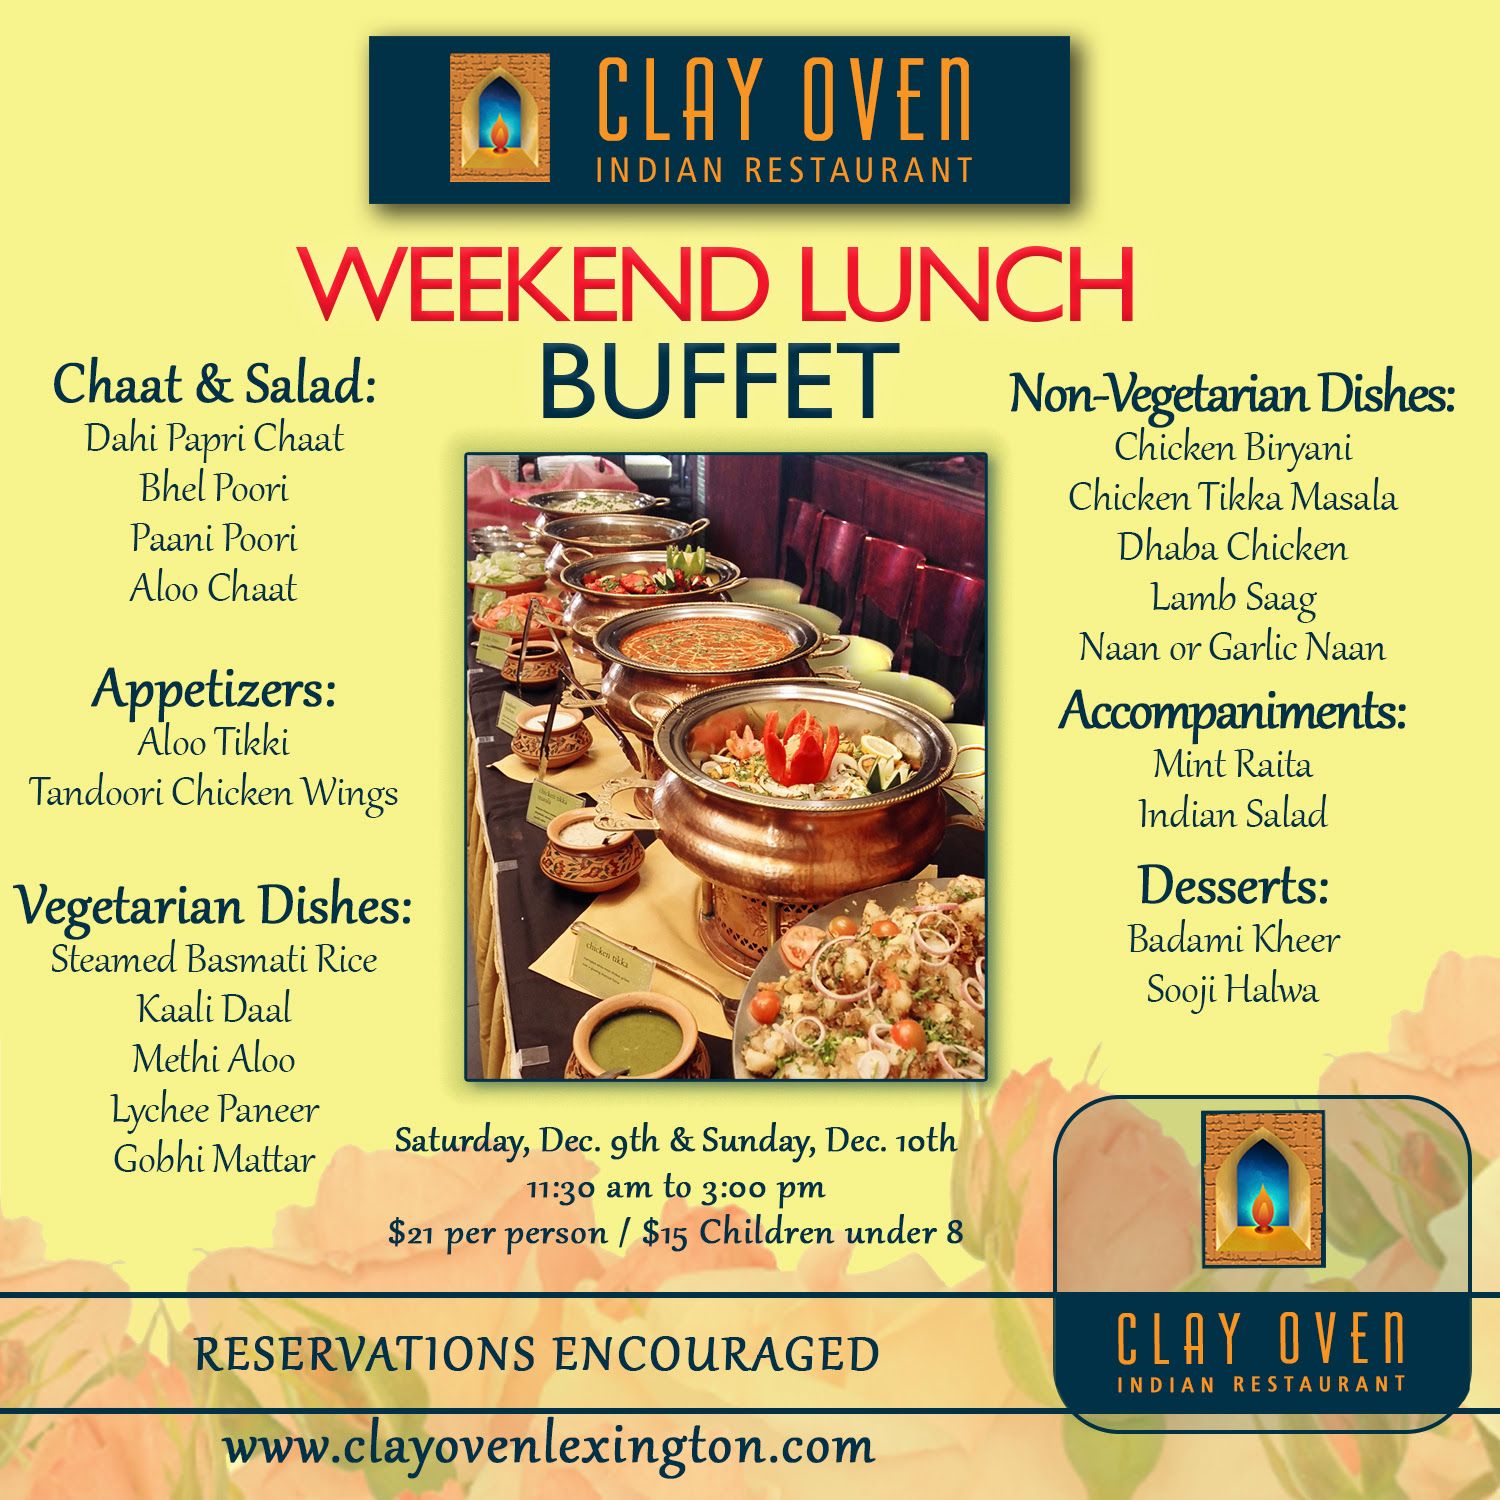 Clay Oven Indian Cuisine